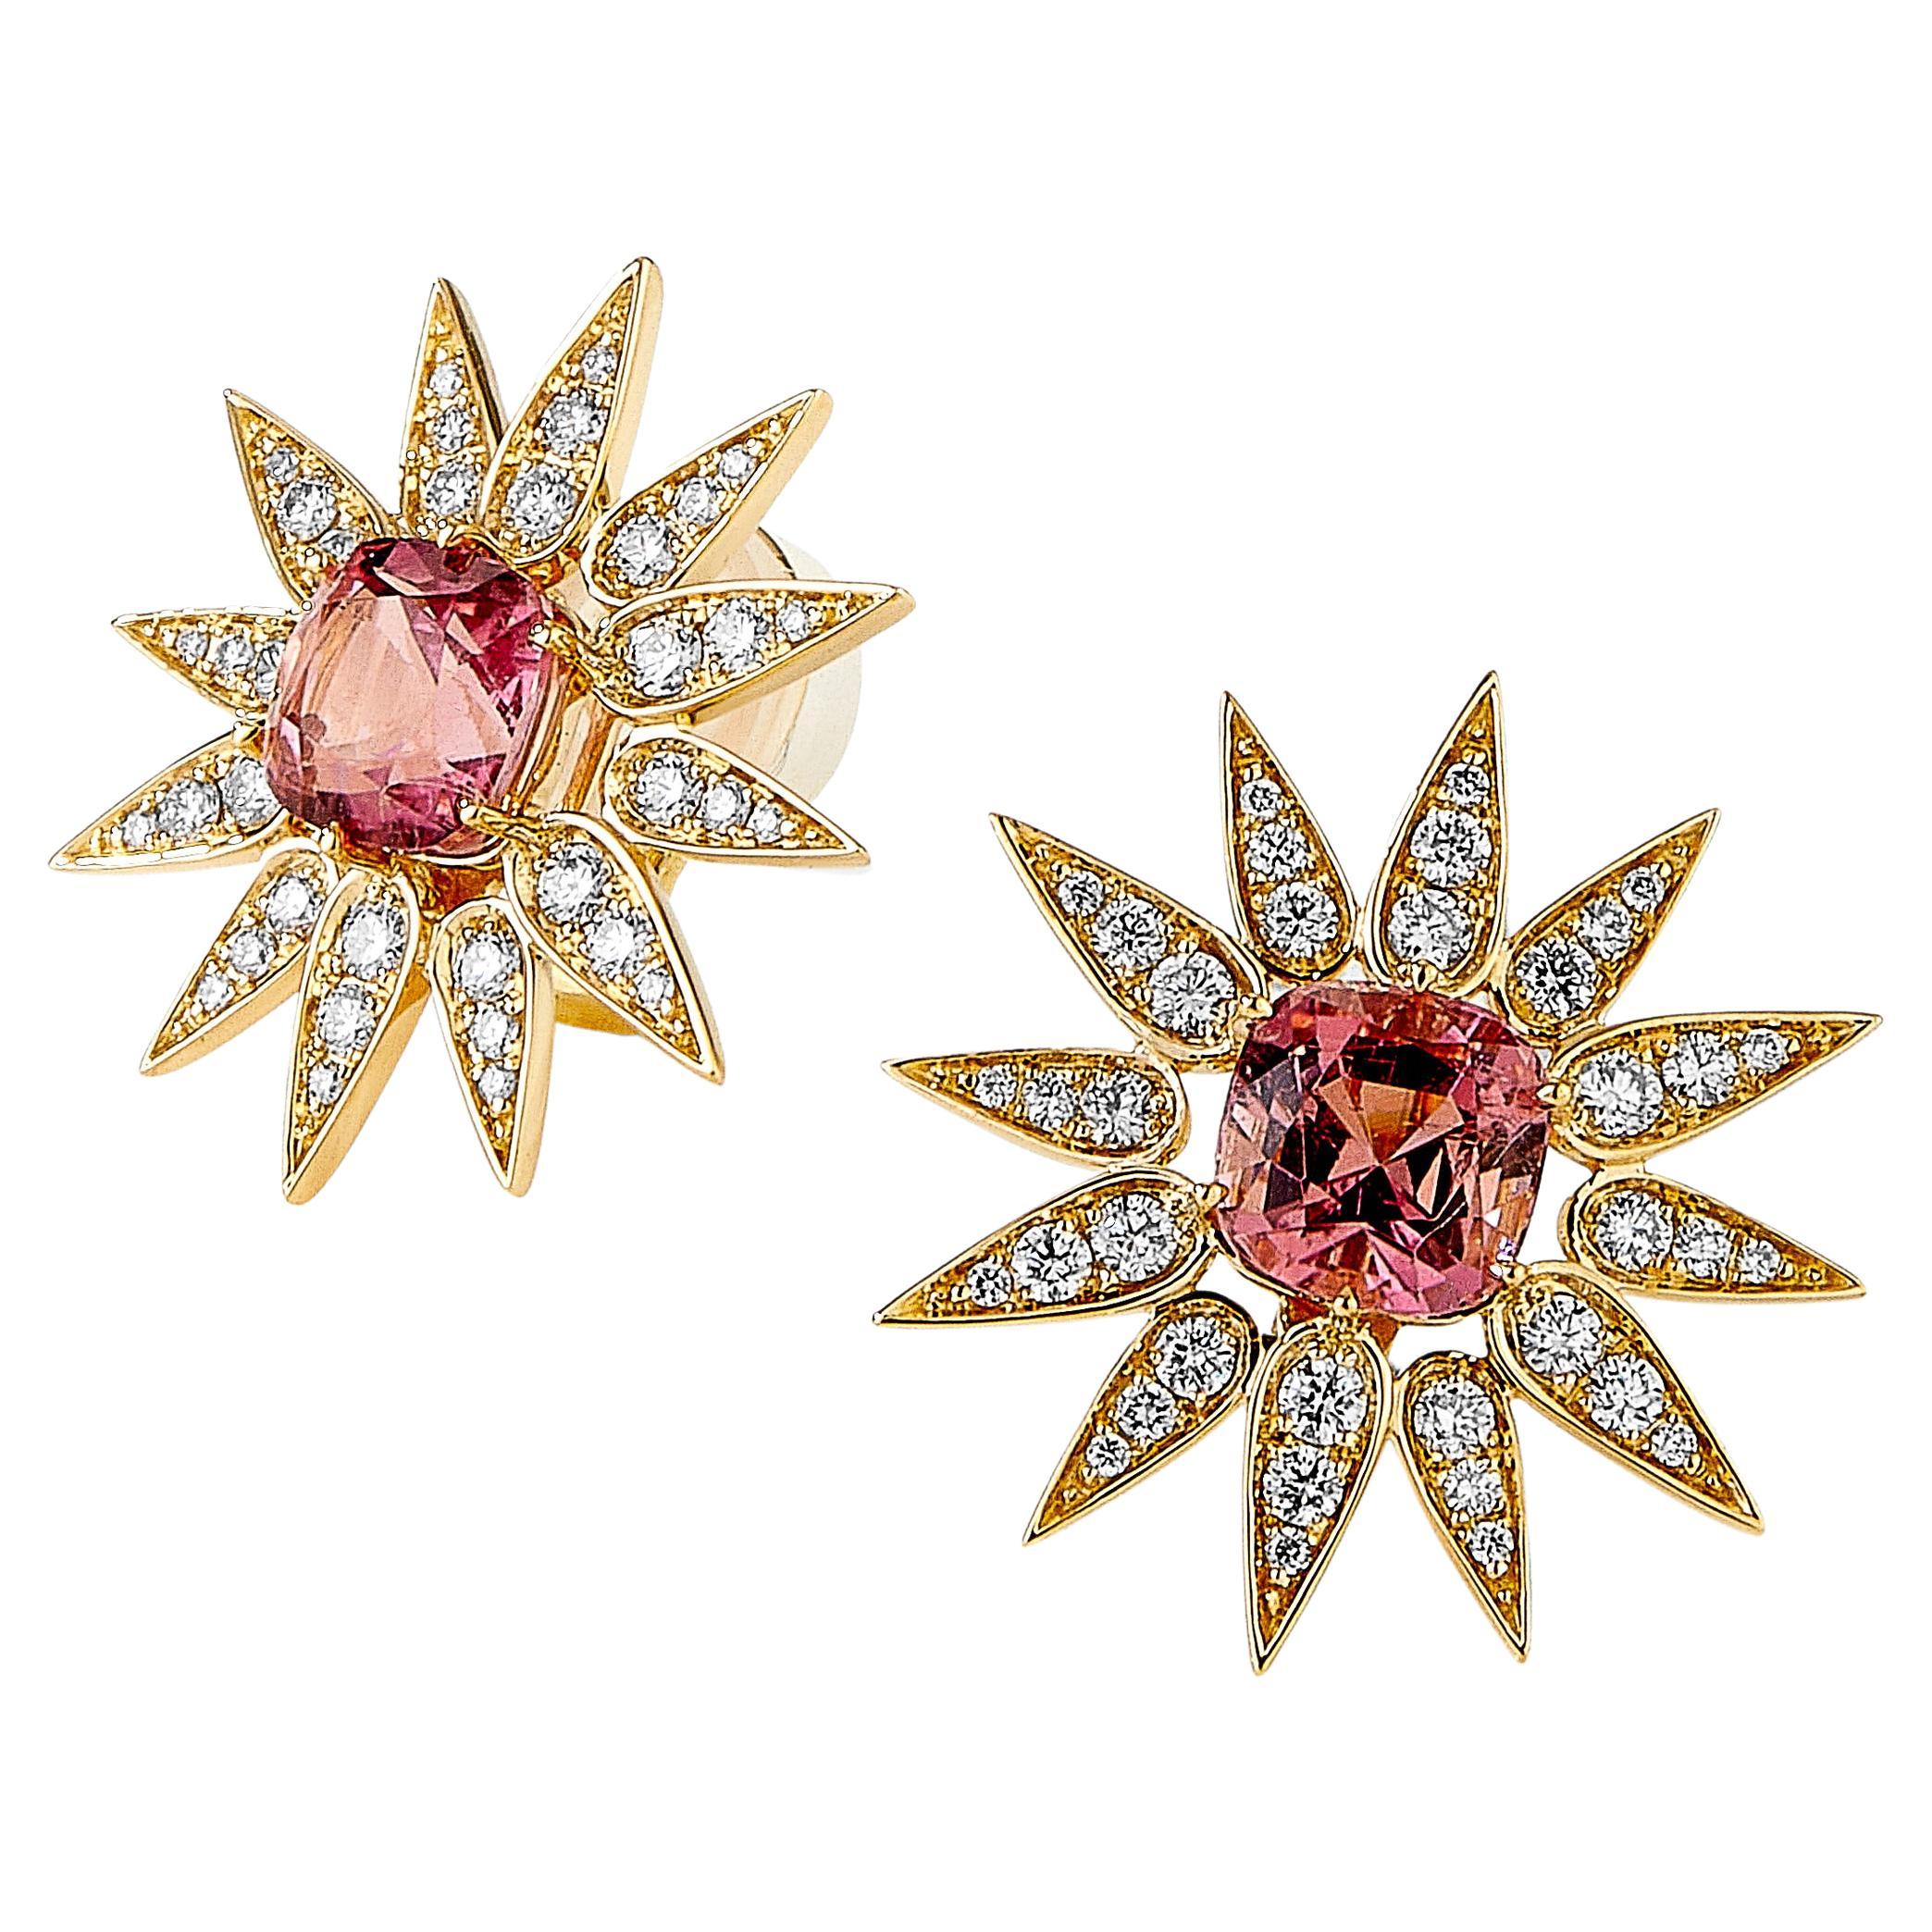 Syna Sunburst Earrings with Pink Tourmaline and Diamonds For Sale